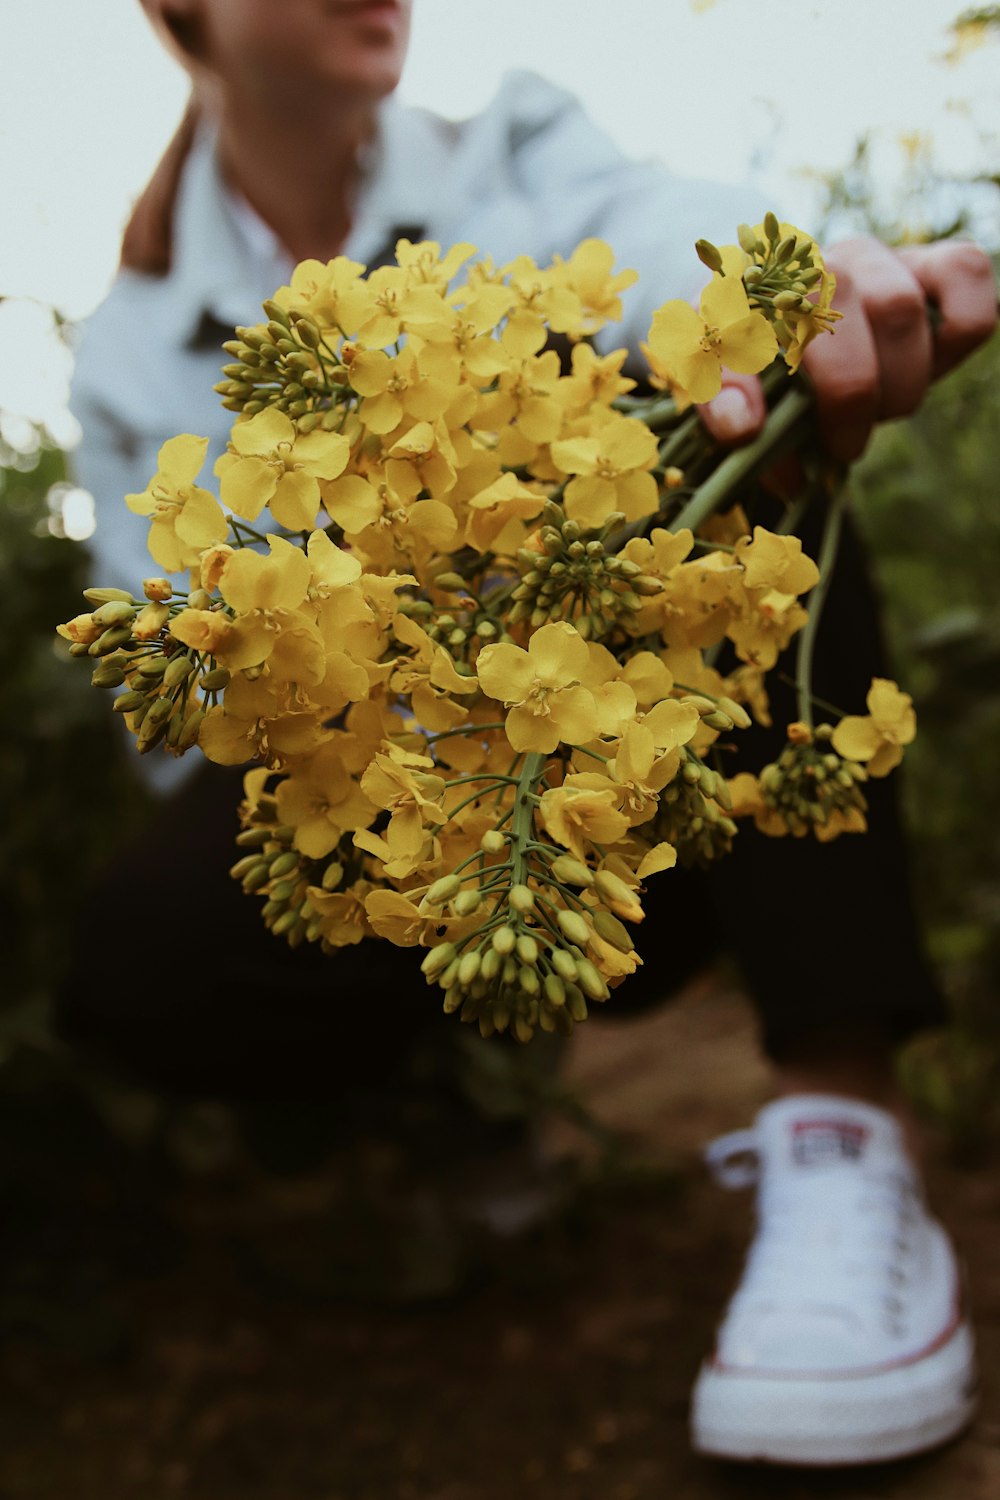 yellow flowers on persons hand